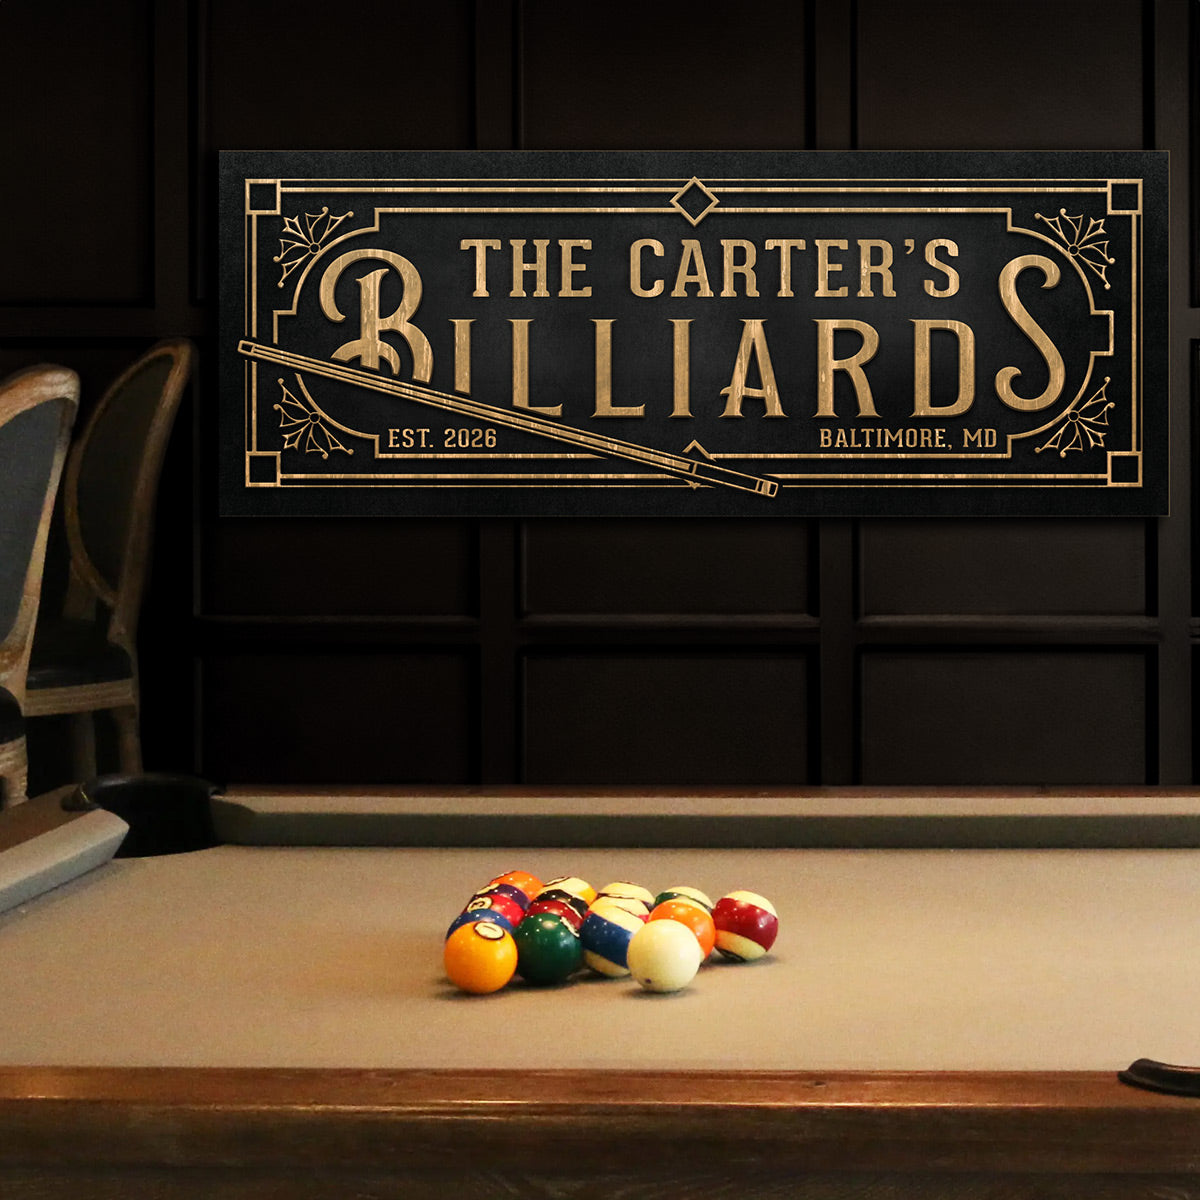 Vintage Personalized Billiards Sign